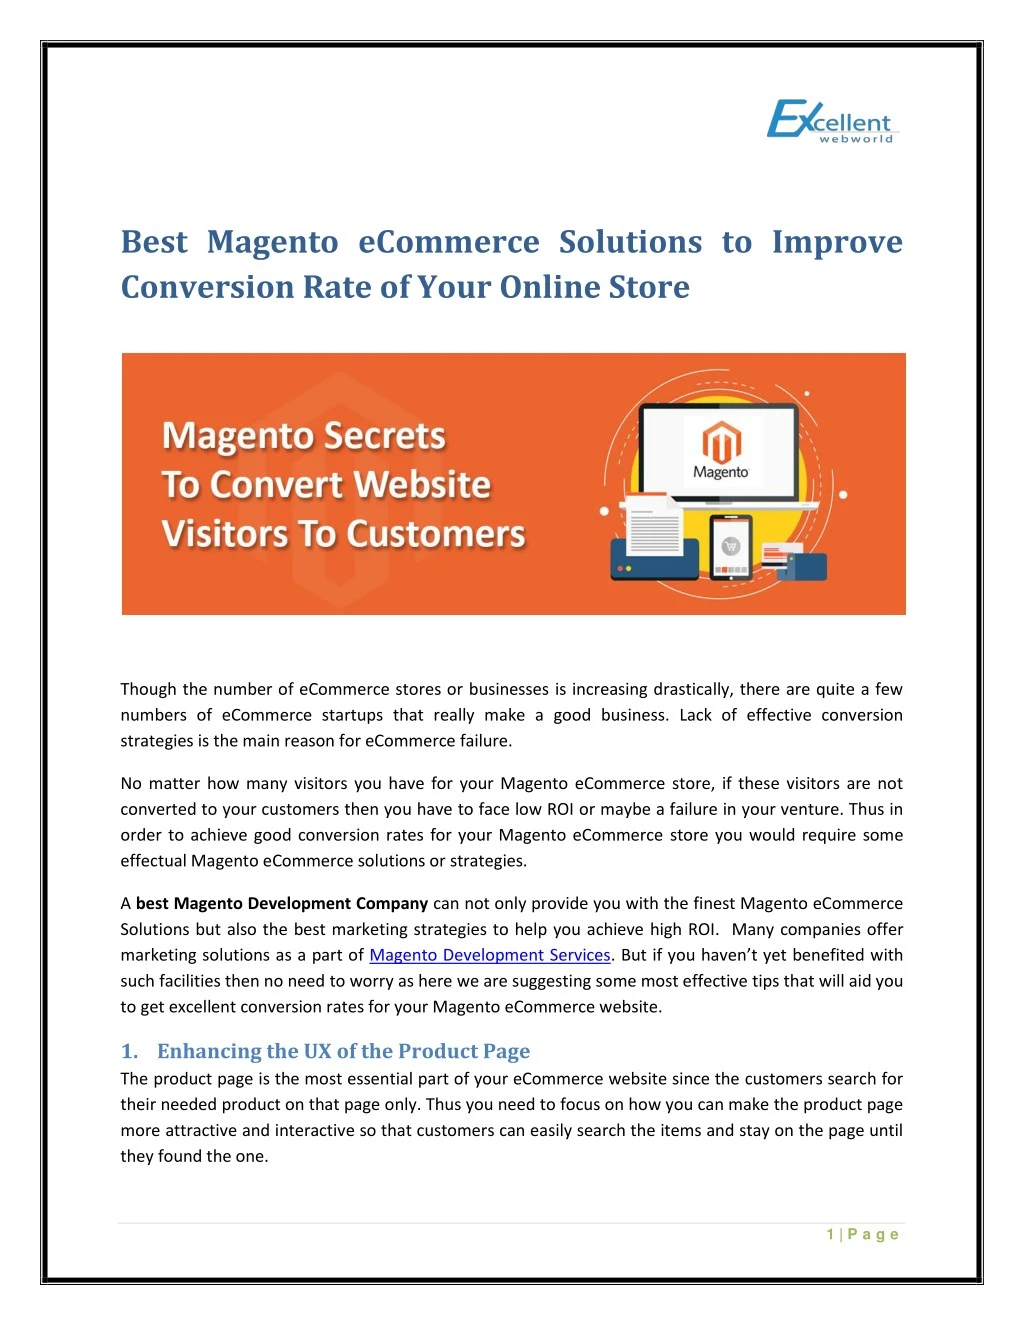 best magento ecommerce solutions to improve